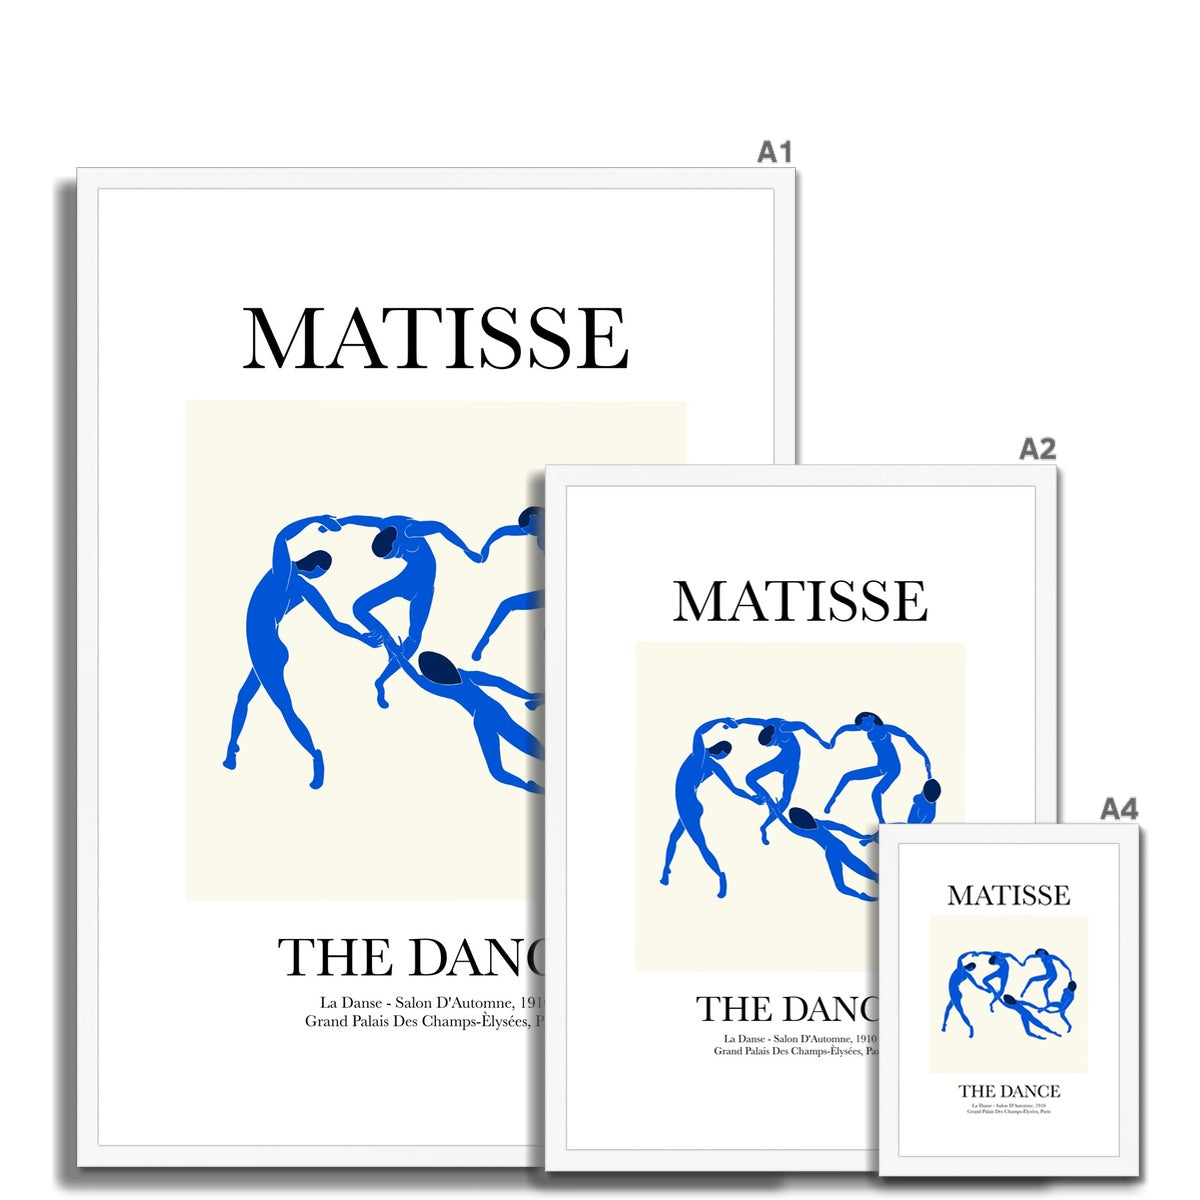 © les muses / Matisse wall art prints featuring nude figure cut outs or "Papiers Découpés" in a danish pastel style. Matisse exhibition posters with paper cut-outs. Berggruen & Cie museum prints for your gallery wall.
